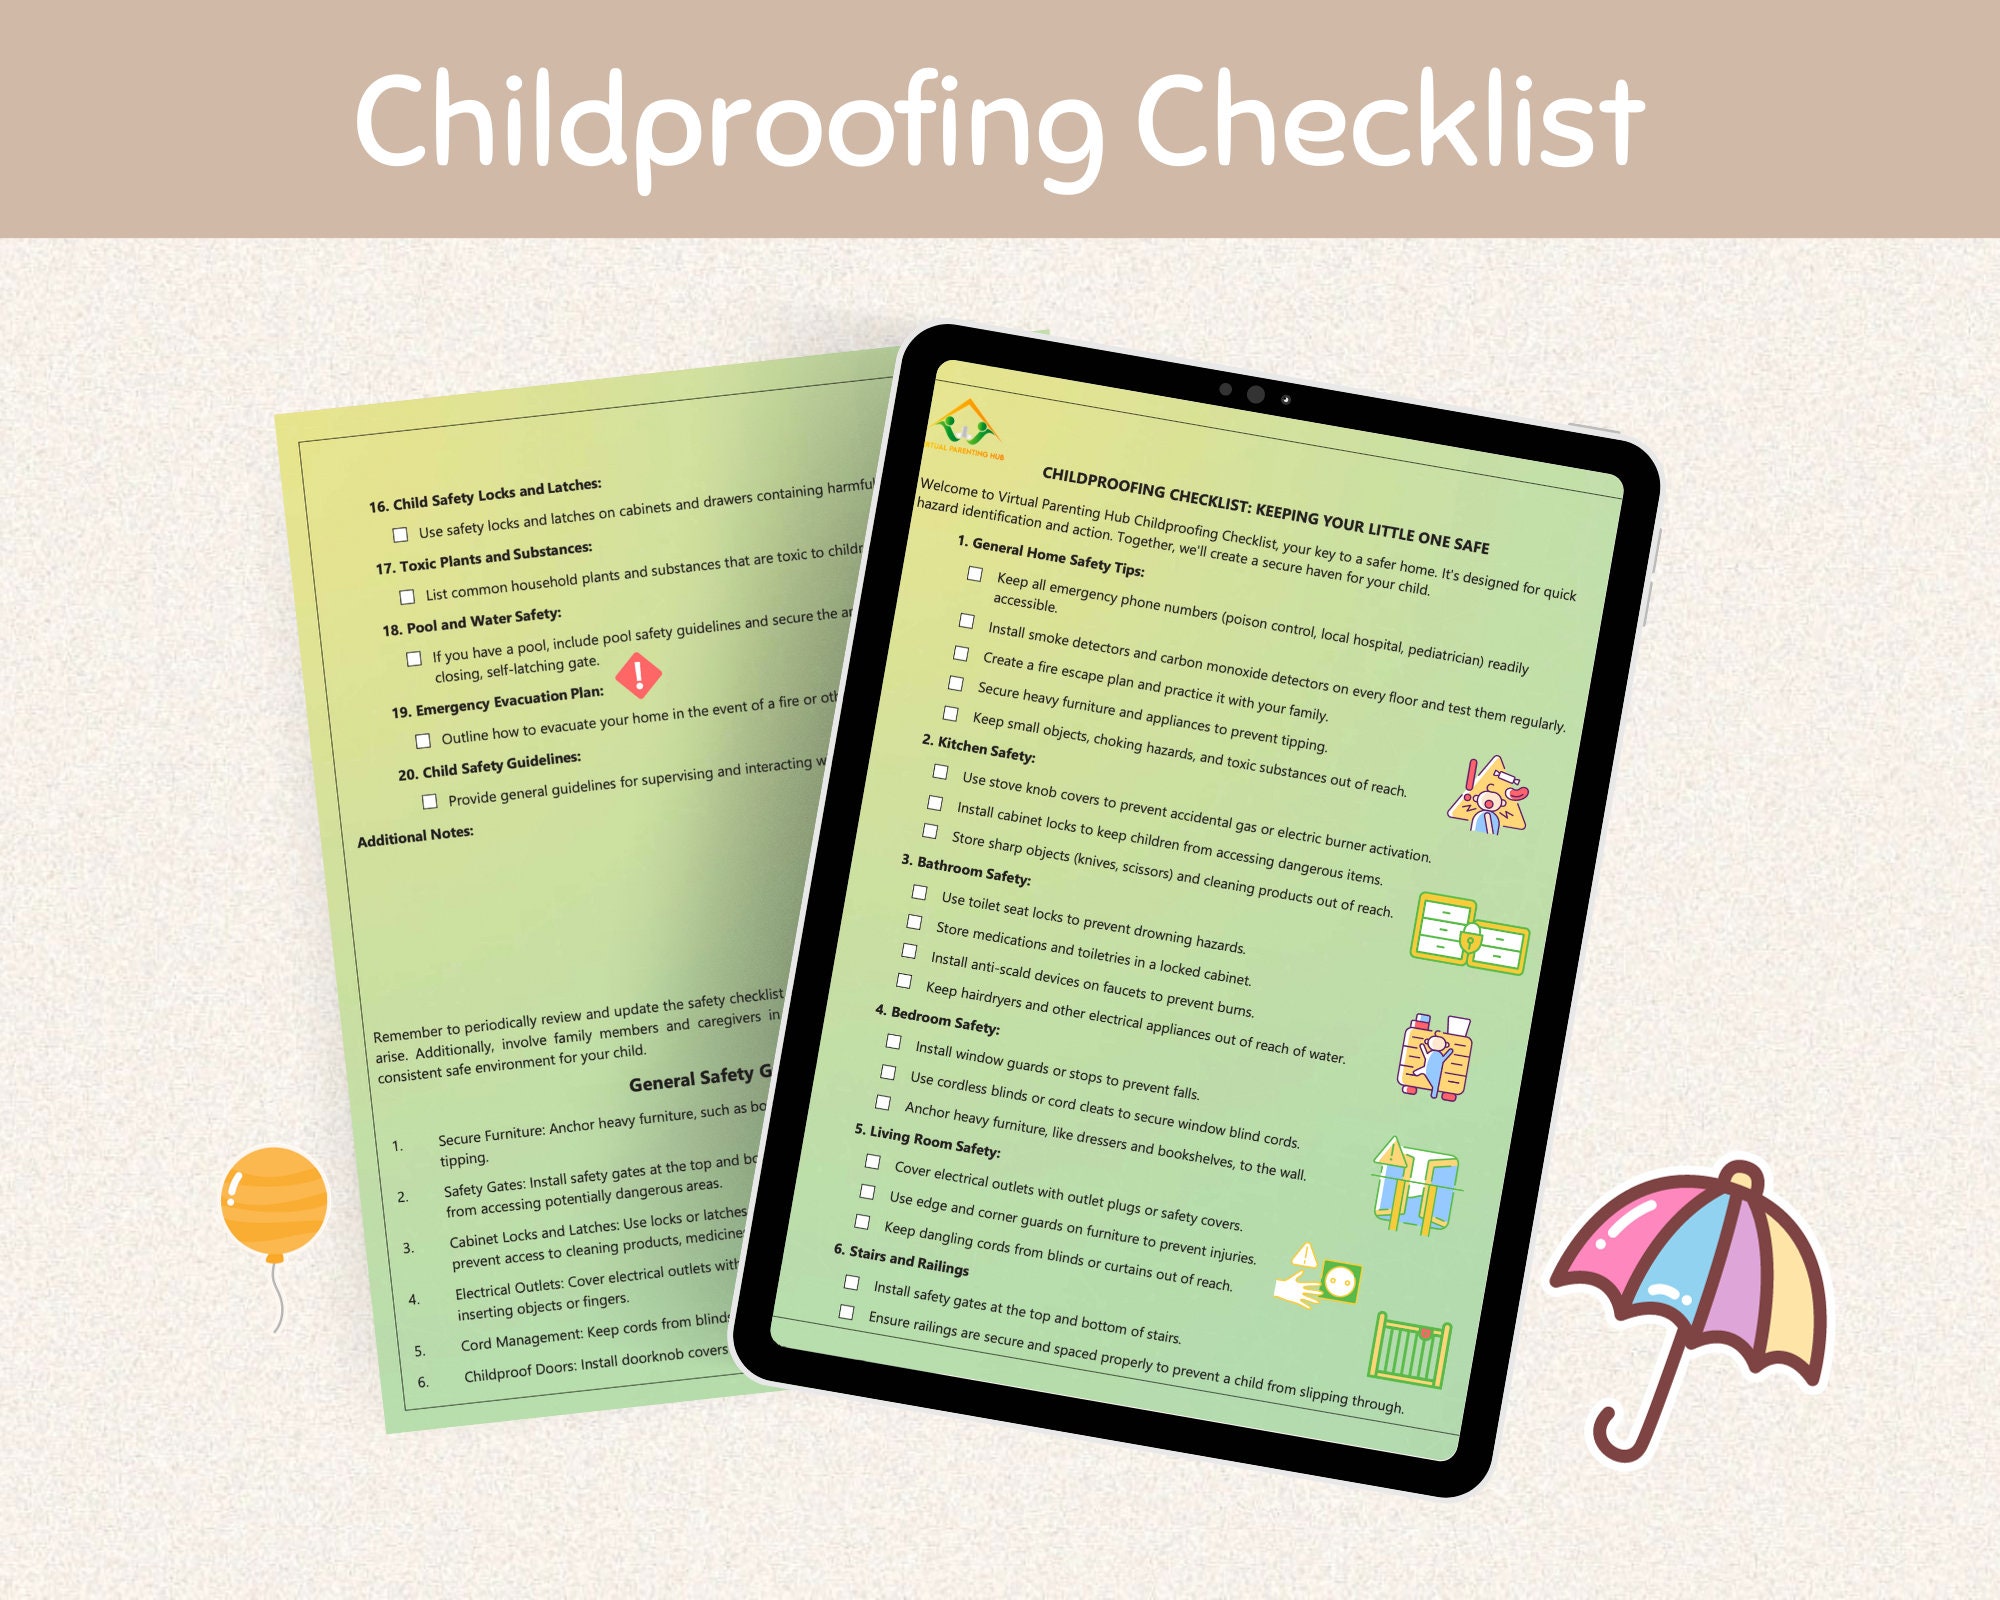 Babyproofing Your House (Free Babyproofing Checklist PDF)